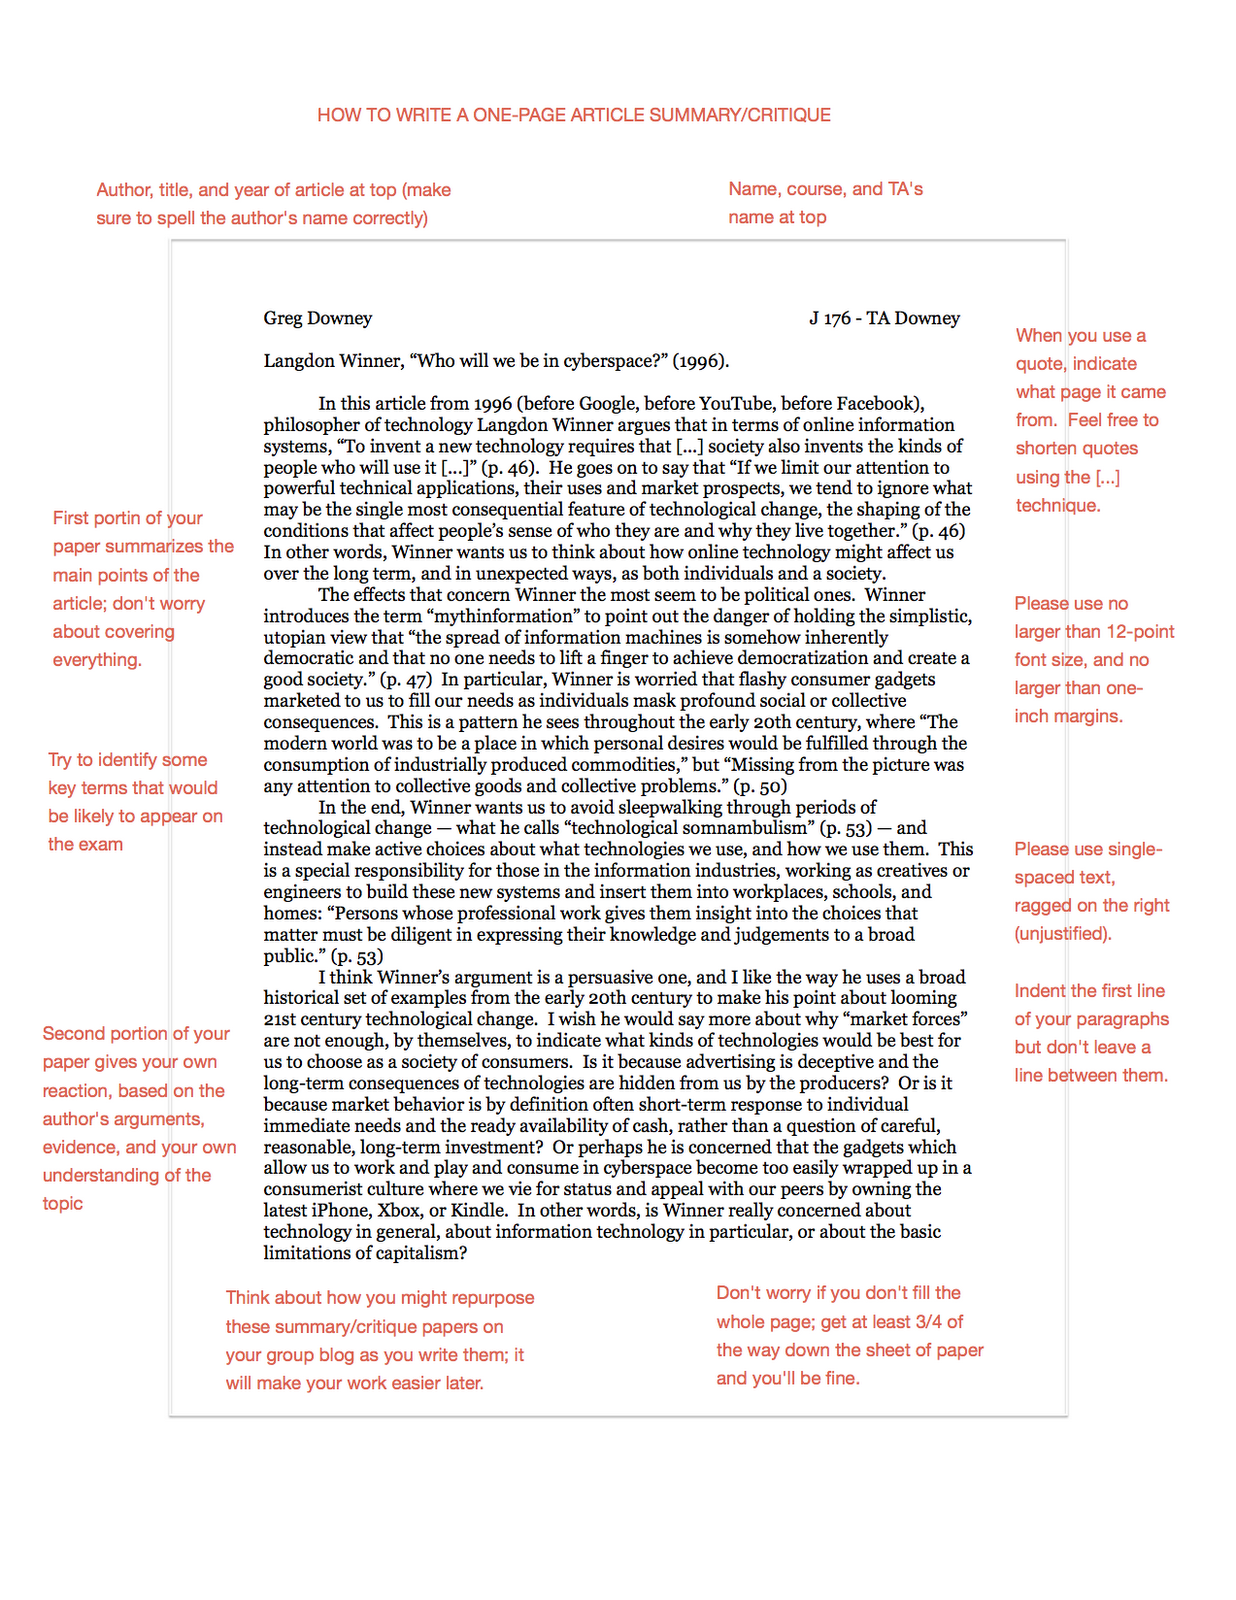 How to write a one page article critique rubric